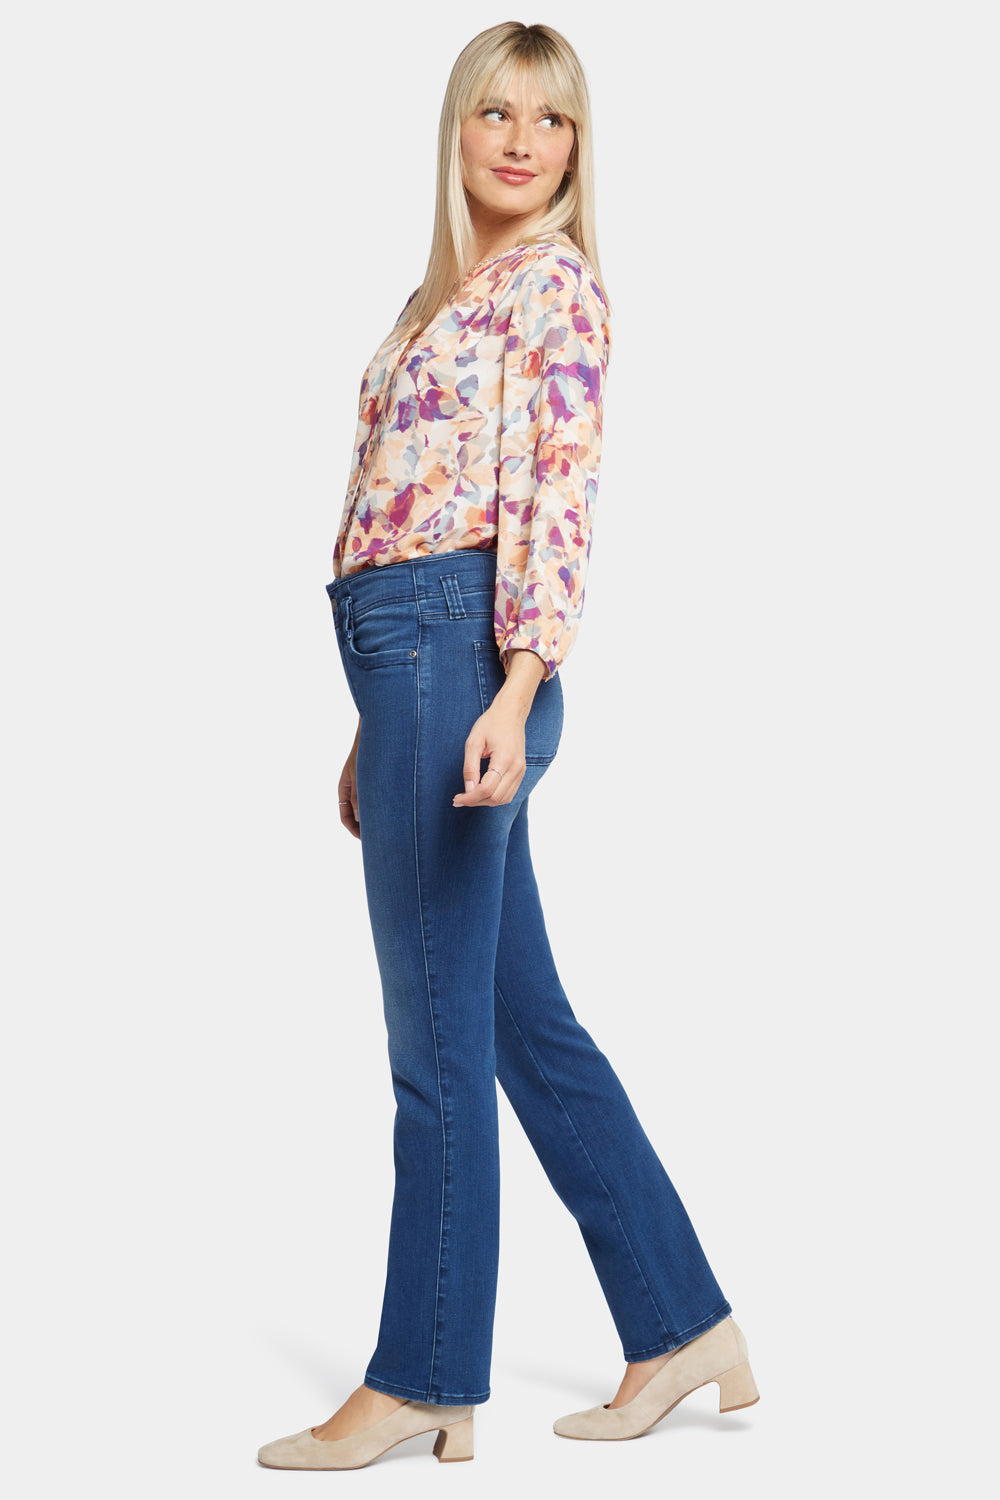 NYDJ Marilyn Straight Jeans With High Rise - Rendezvous